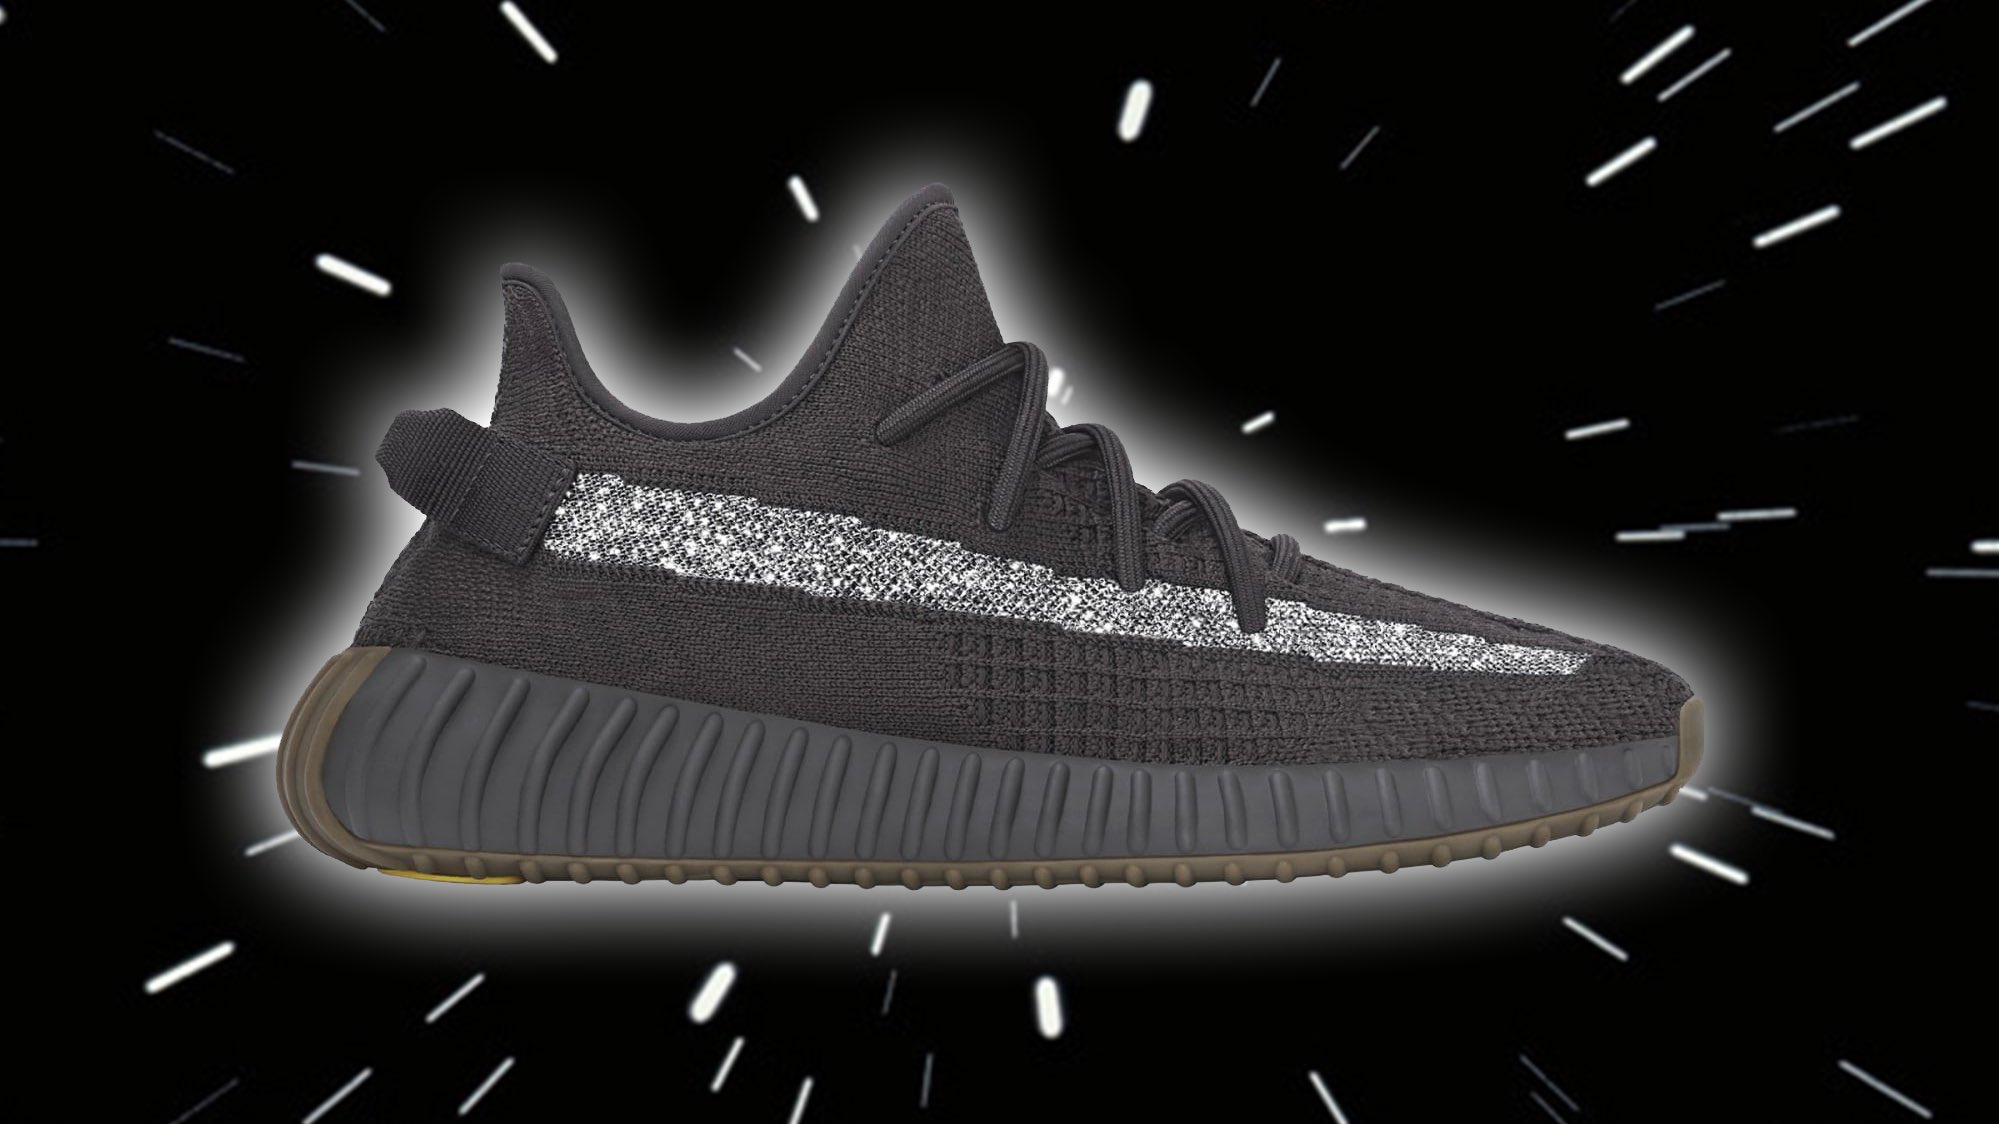 YEEZY MAFIA on Twitter: "YEEZY BOOST 350 V2 CINDER REFLECTIVE PRE-ORDER NOW ON COMMENT SIZE https://t.co/7Jd0yQsQsZ" / Twitter